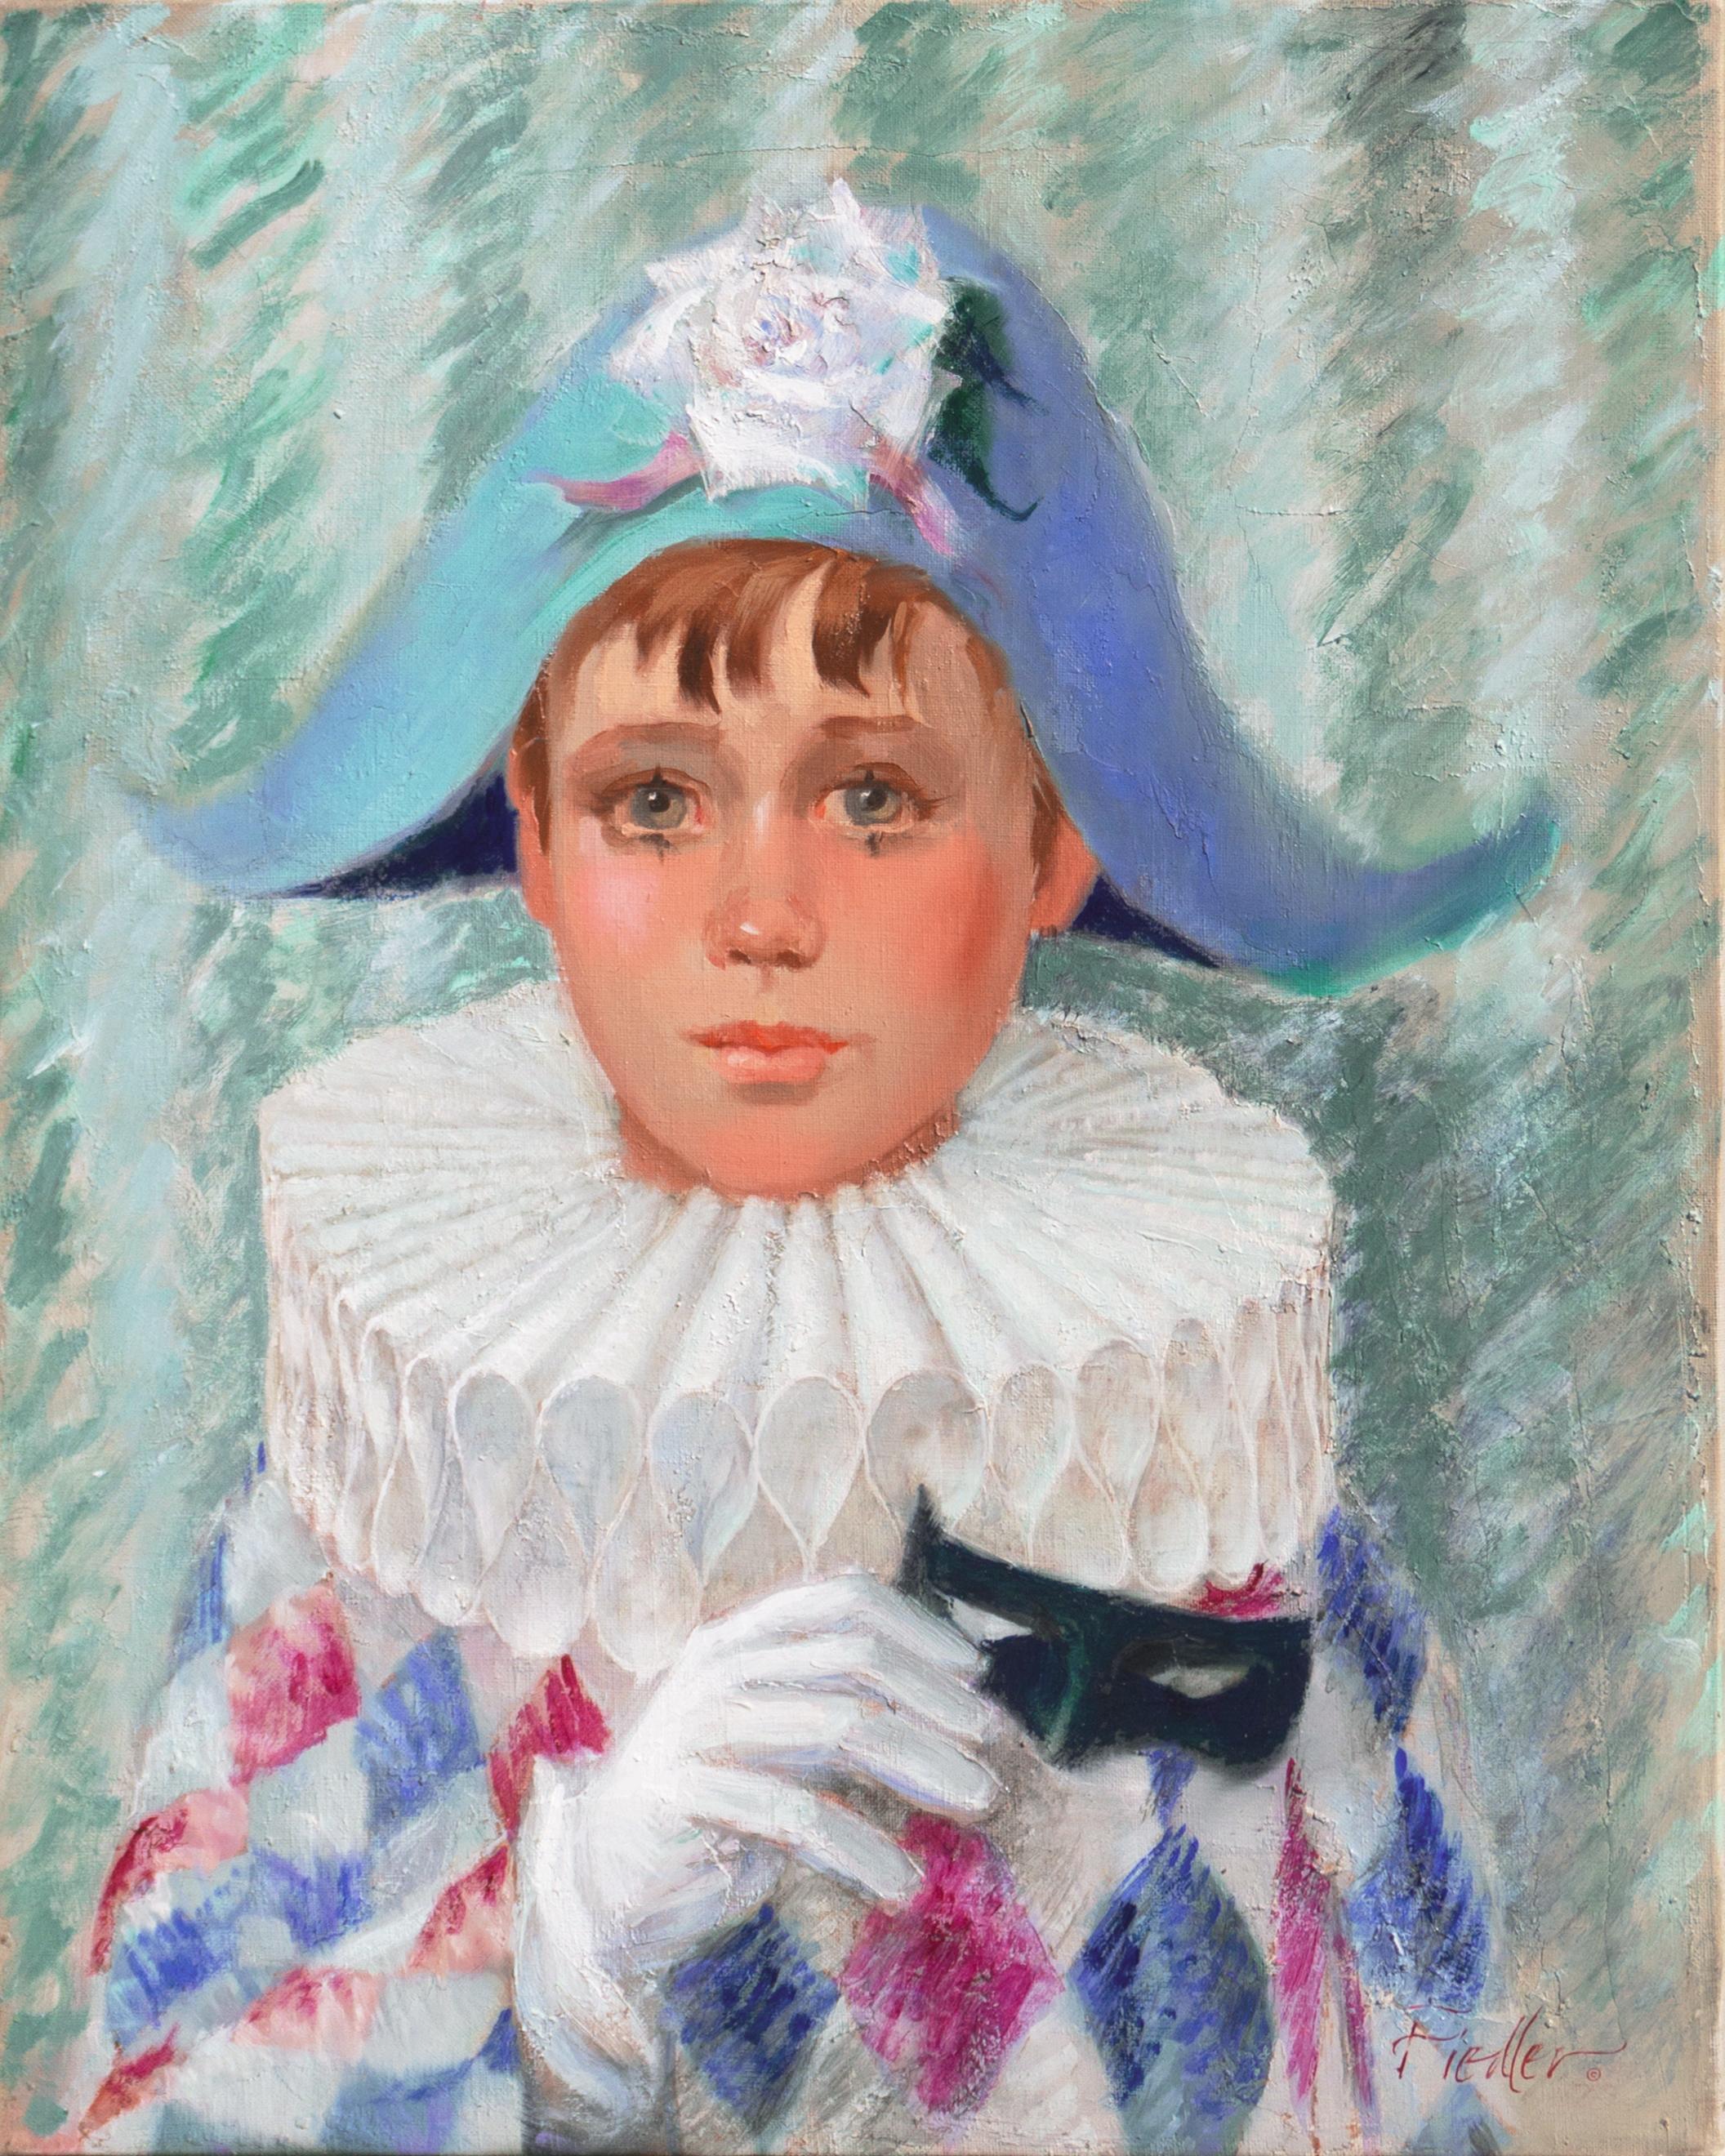 Fiedler Figurative Painting -  'Young Pierrot', Arlequino, Harlequin, Costume Party, Fancy Dress Ball